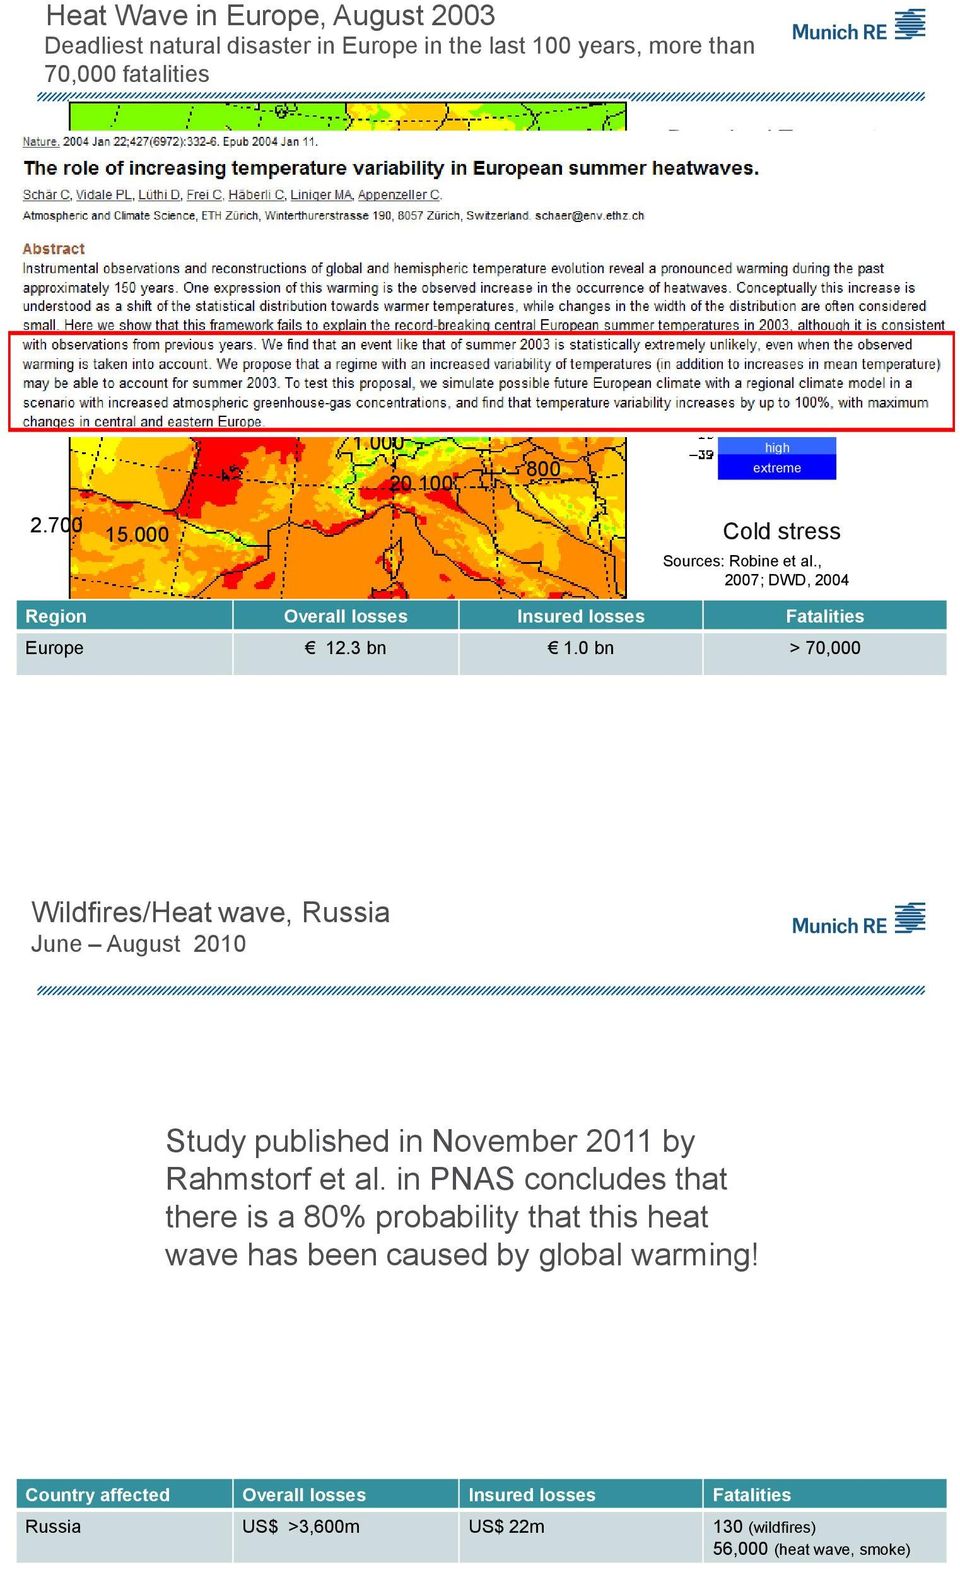 , 2007; DWD, 2004 Region Overall losses Insured losses Fatalities Europe 12.3 bn 1.0 bn > 70,000 Wildfires/Heat wave, Russia June August 2010 Study published in November 2011 by Rahmstorf et al.